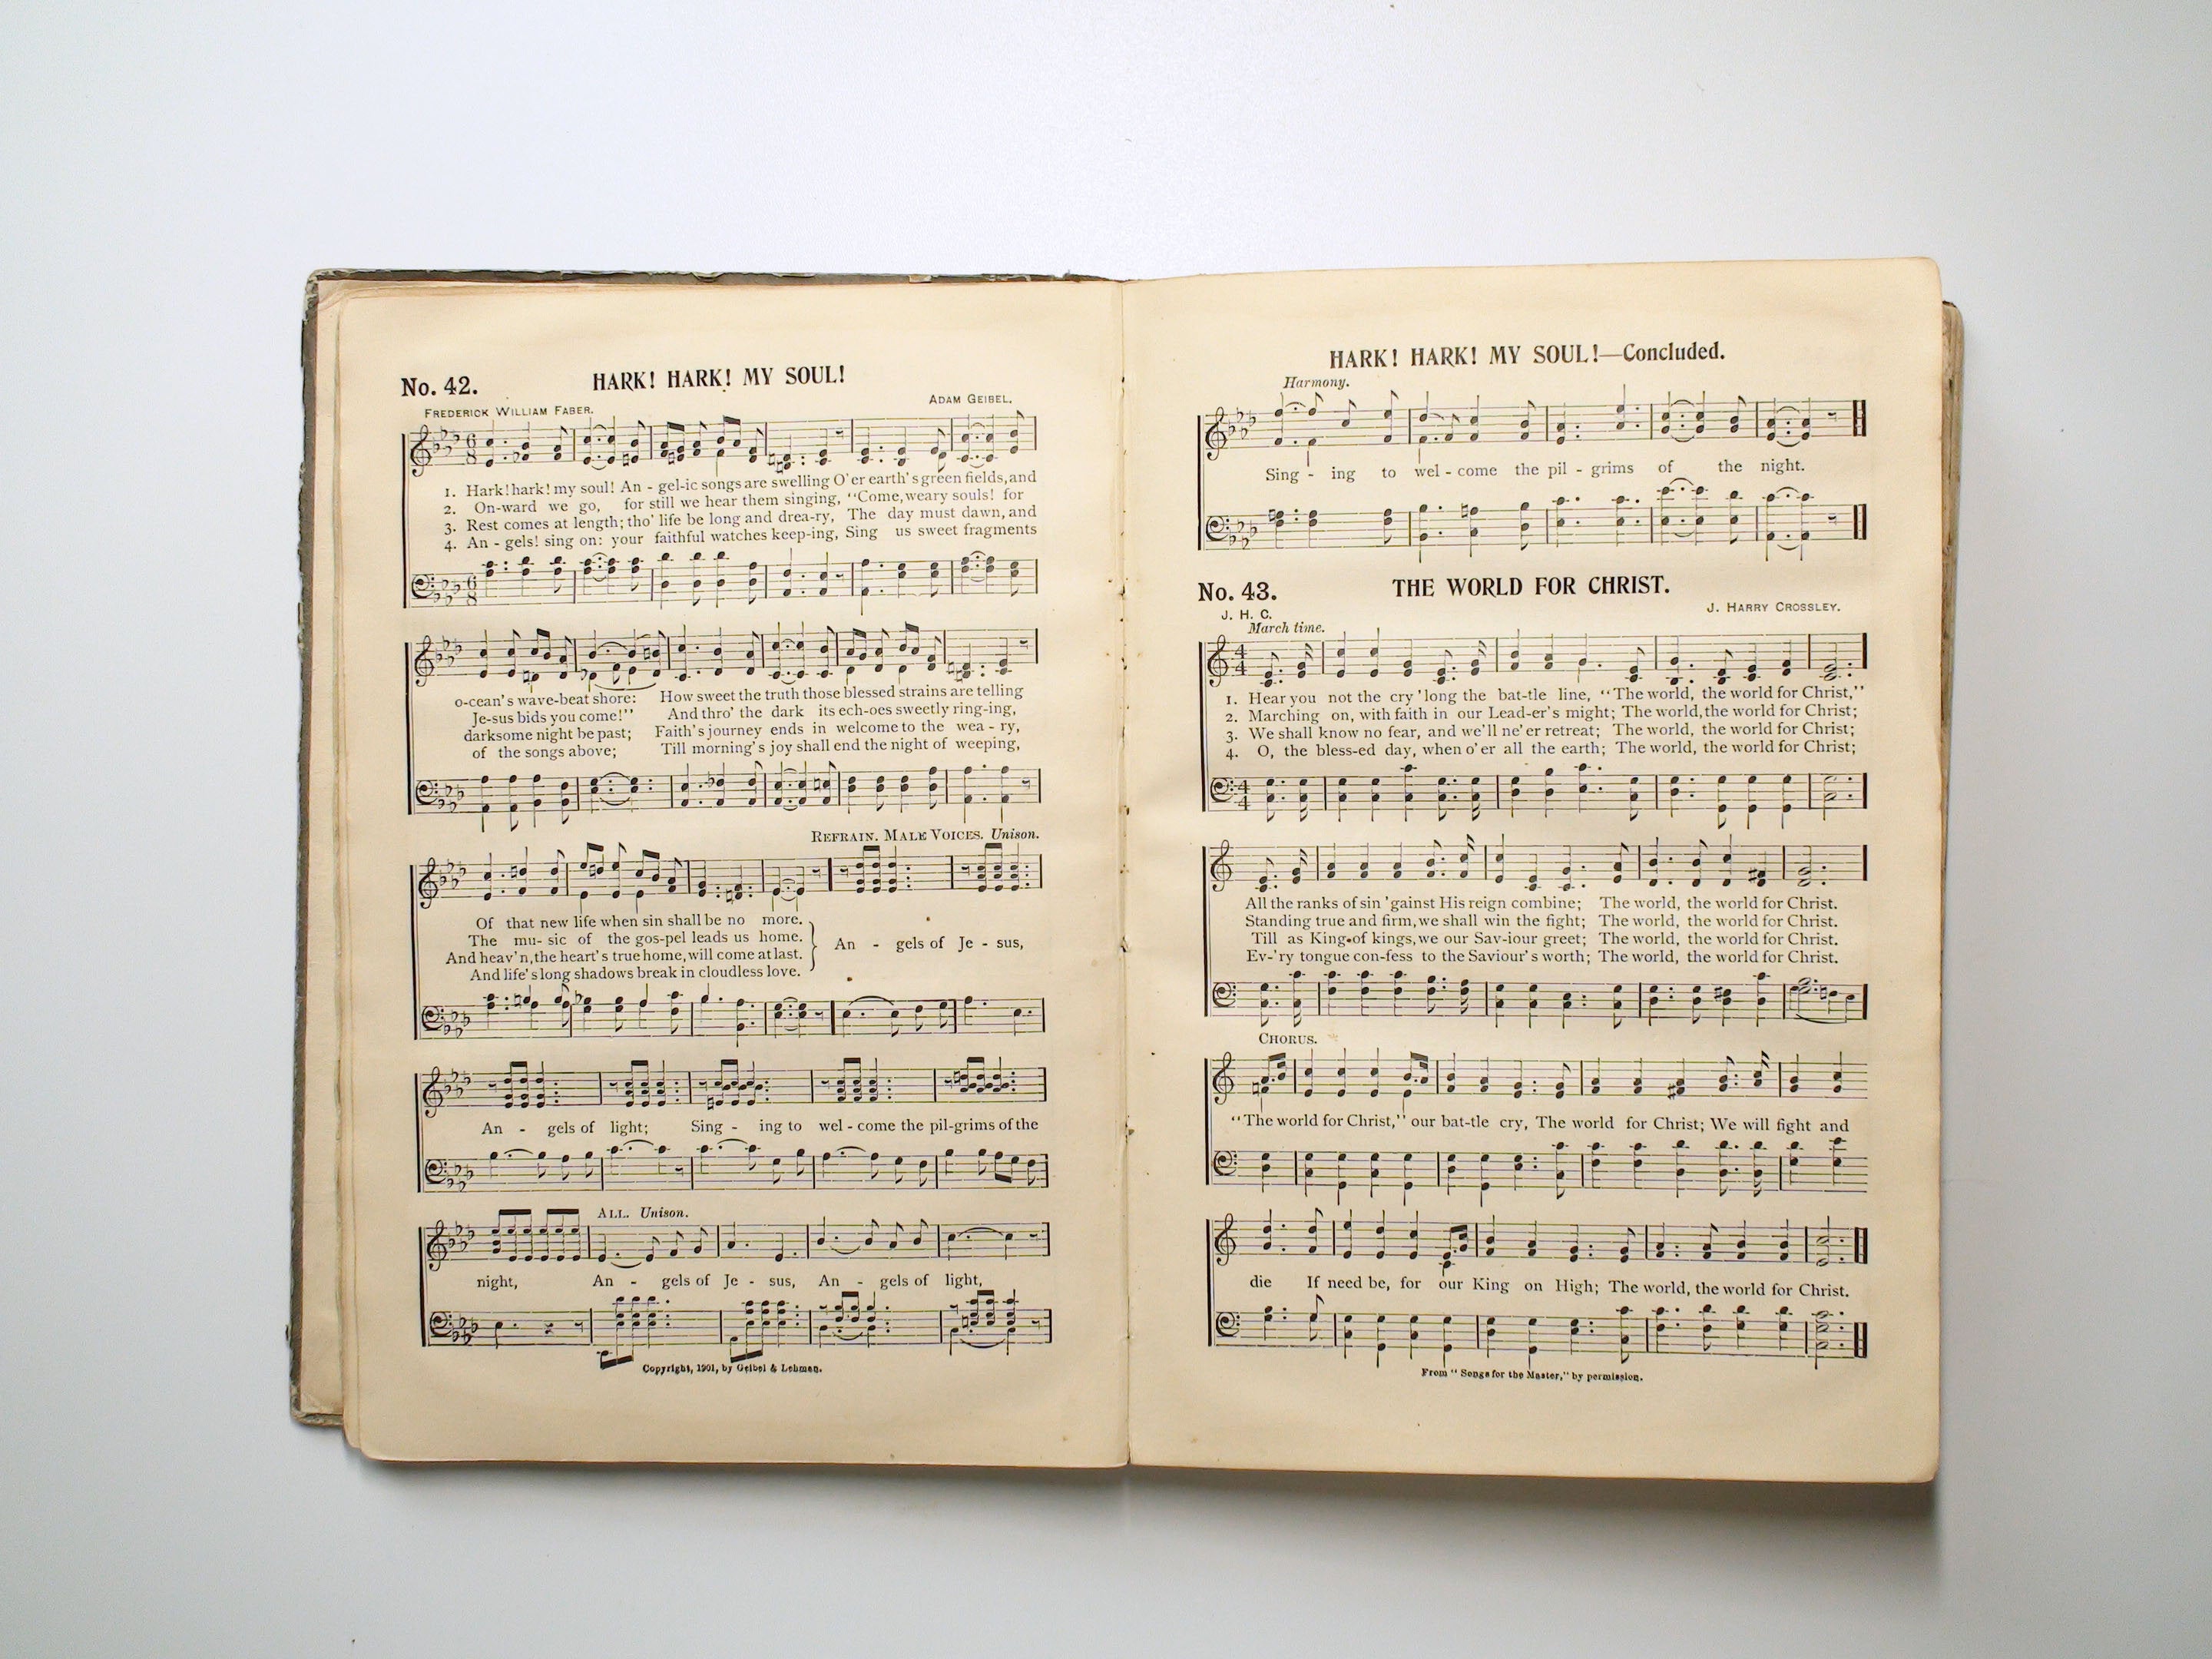 Uplifted Voices, A New Century Hymn Book, Adam Geibel and R. Frank Lehman, 1901